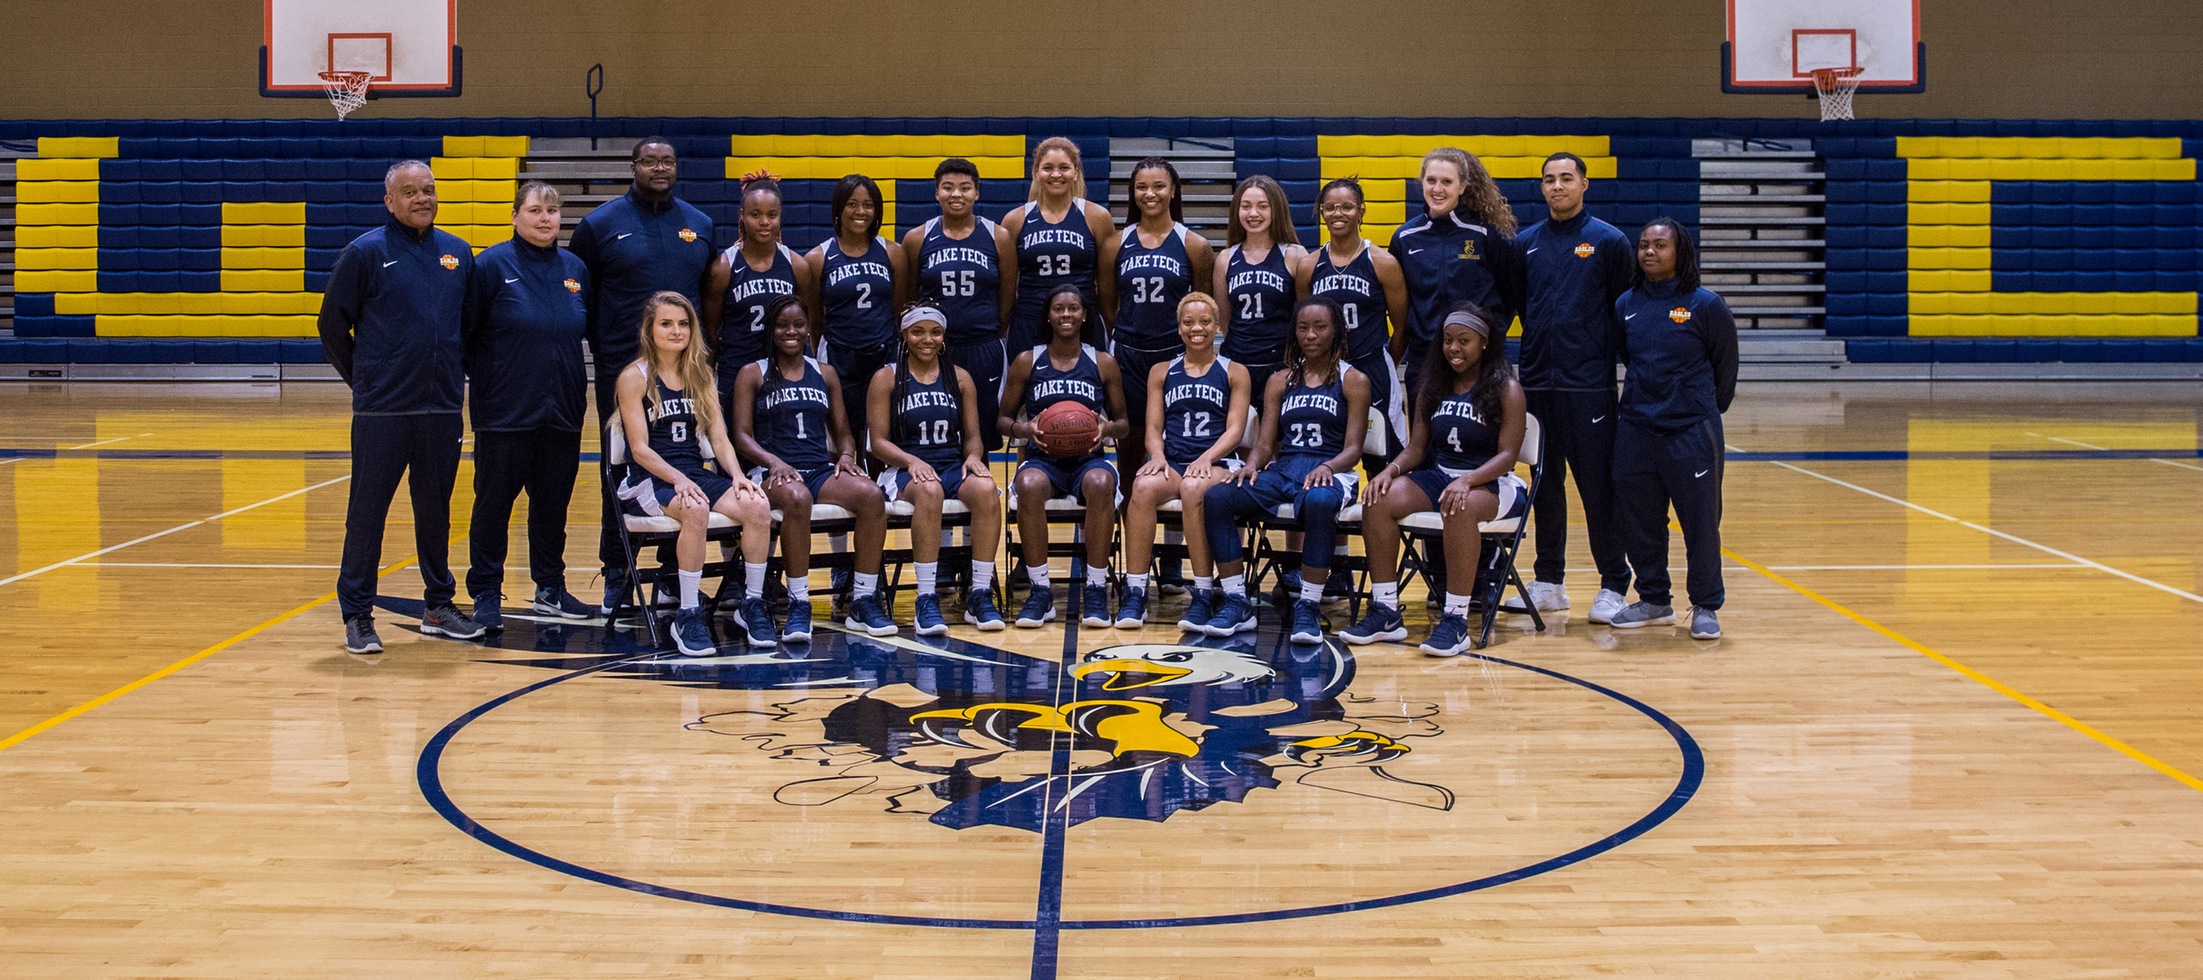 Women's Basketball Improves to 2-0